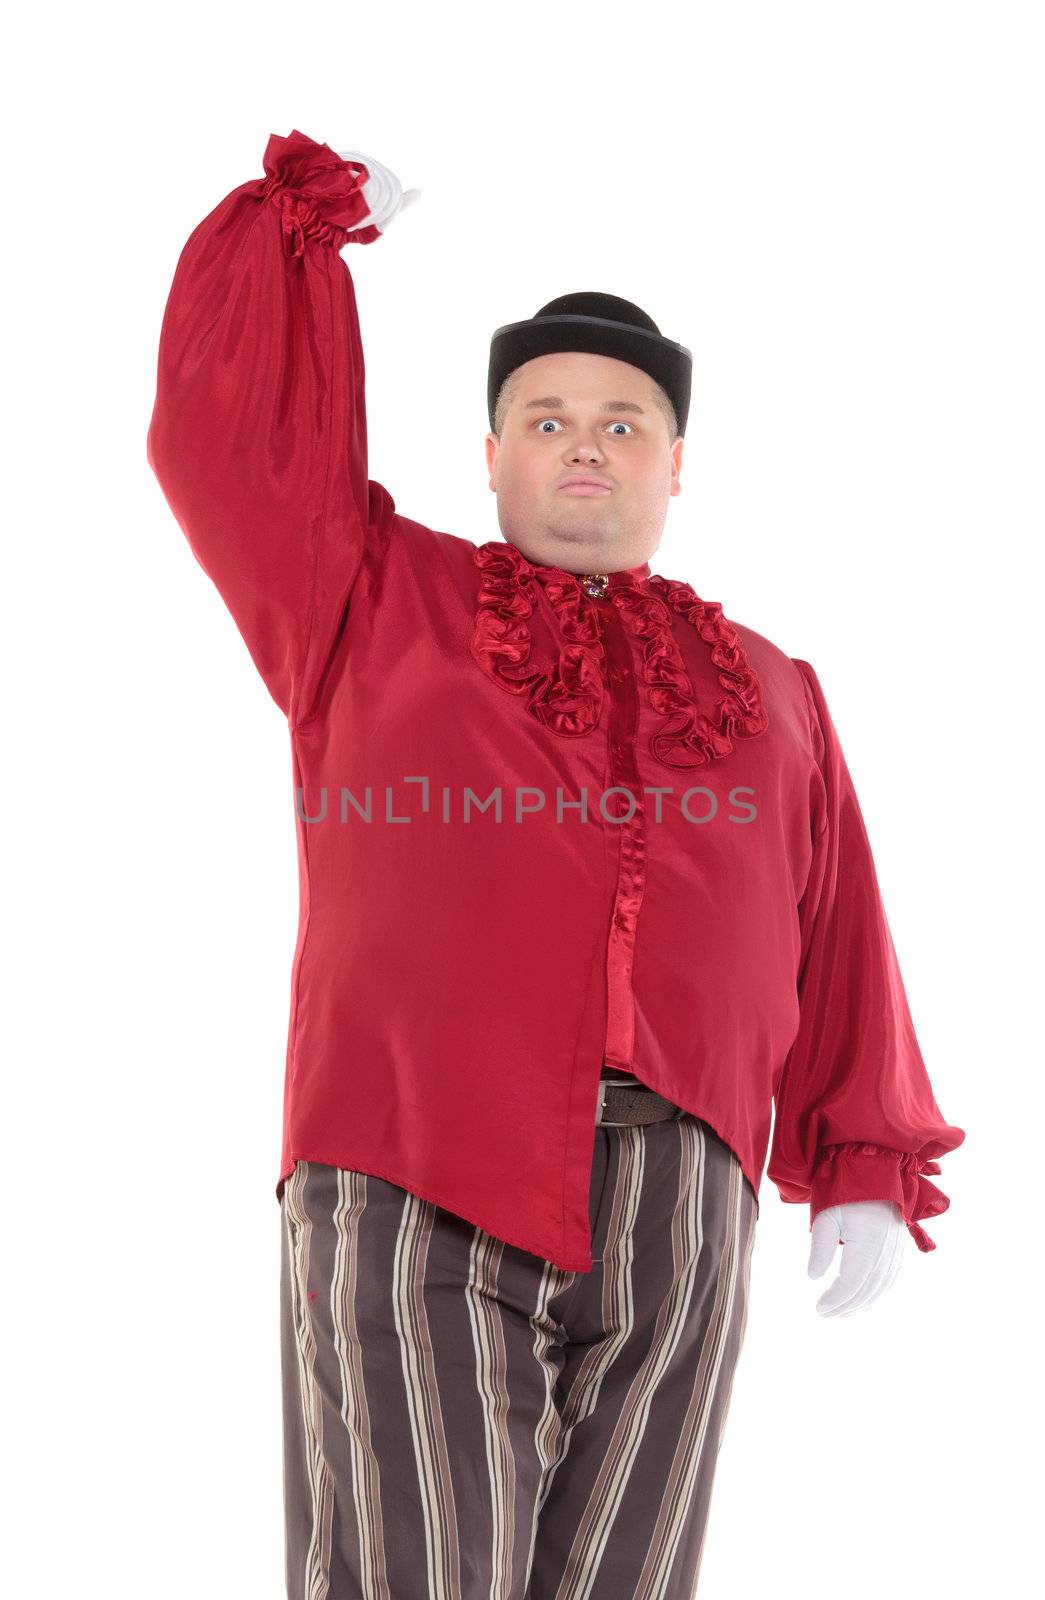 Obese man in a red costume and bowler hat by Discovod